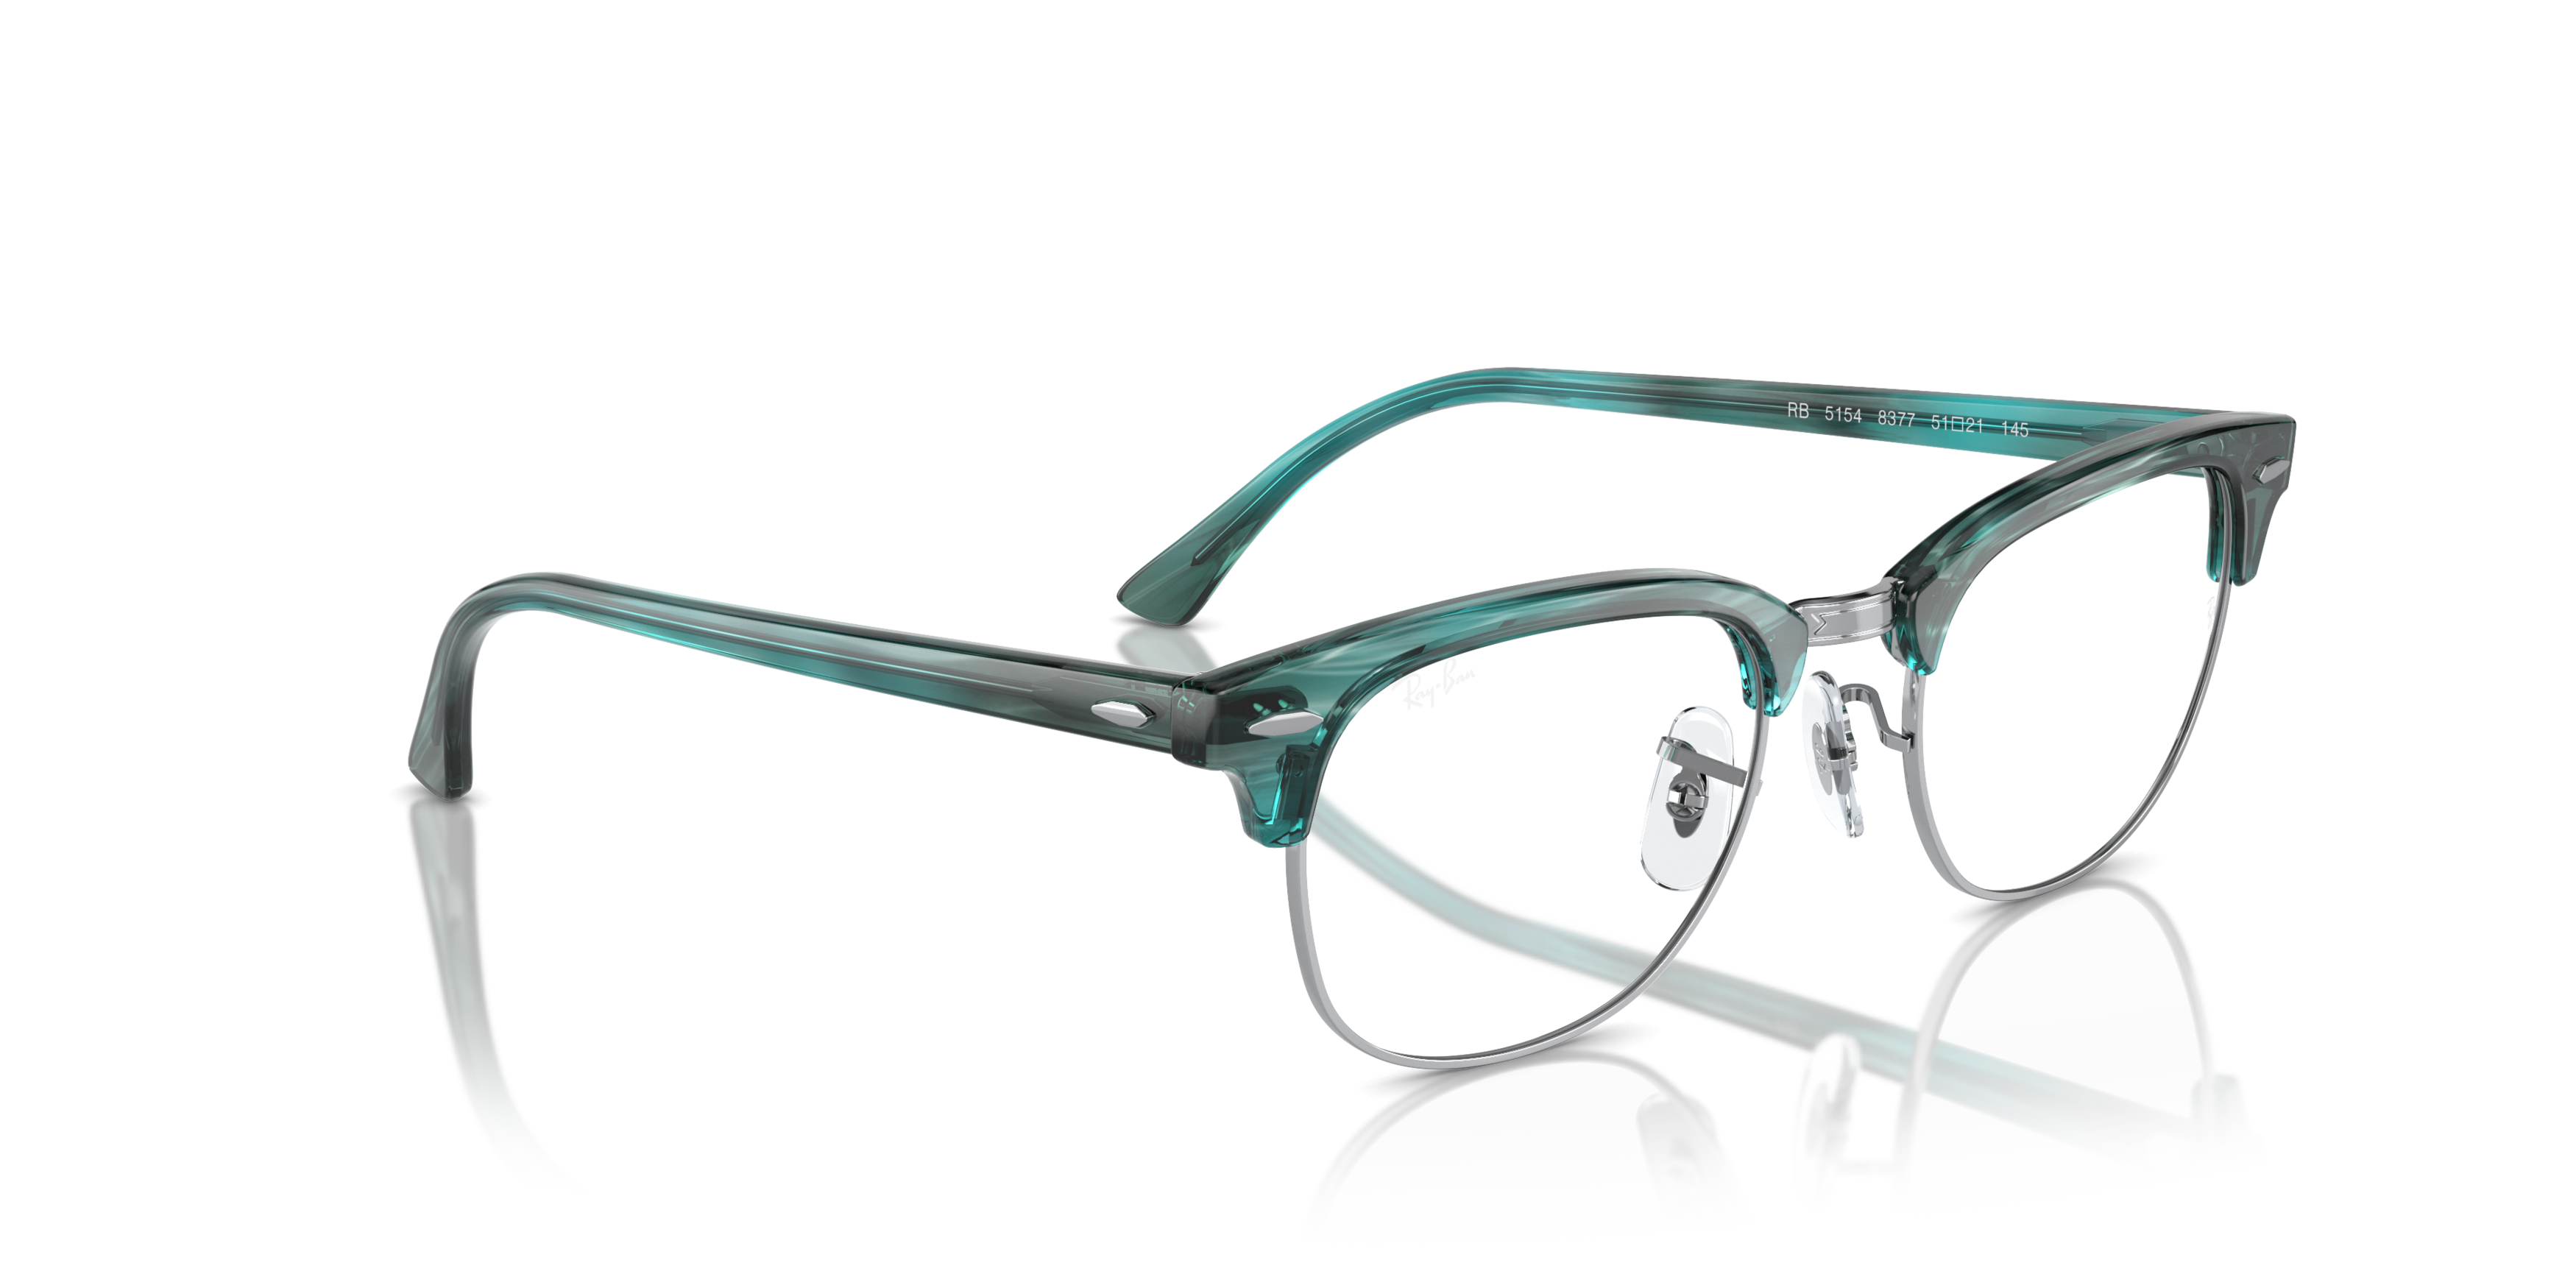 Angle_Right01 Ray-Ban LEGACY RX5154 8377 Groen, Zilver